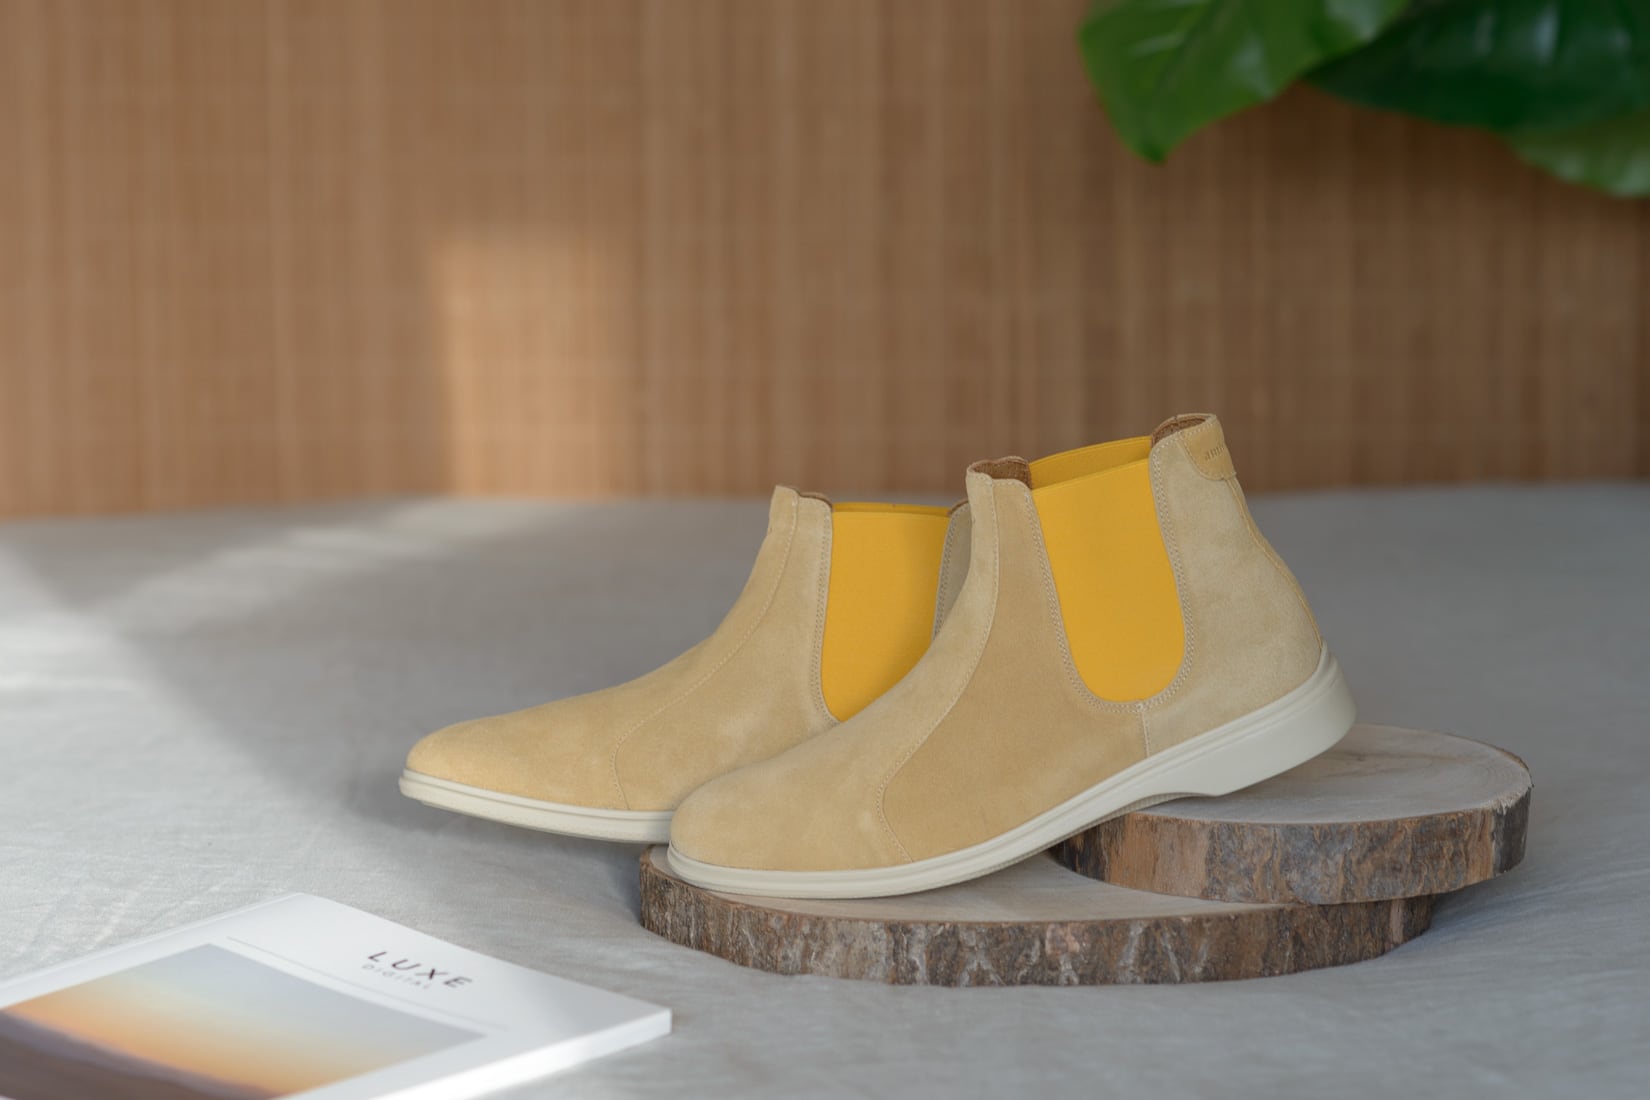 Amberjack Chelsea boots review - Luxe Digital